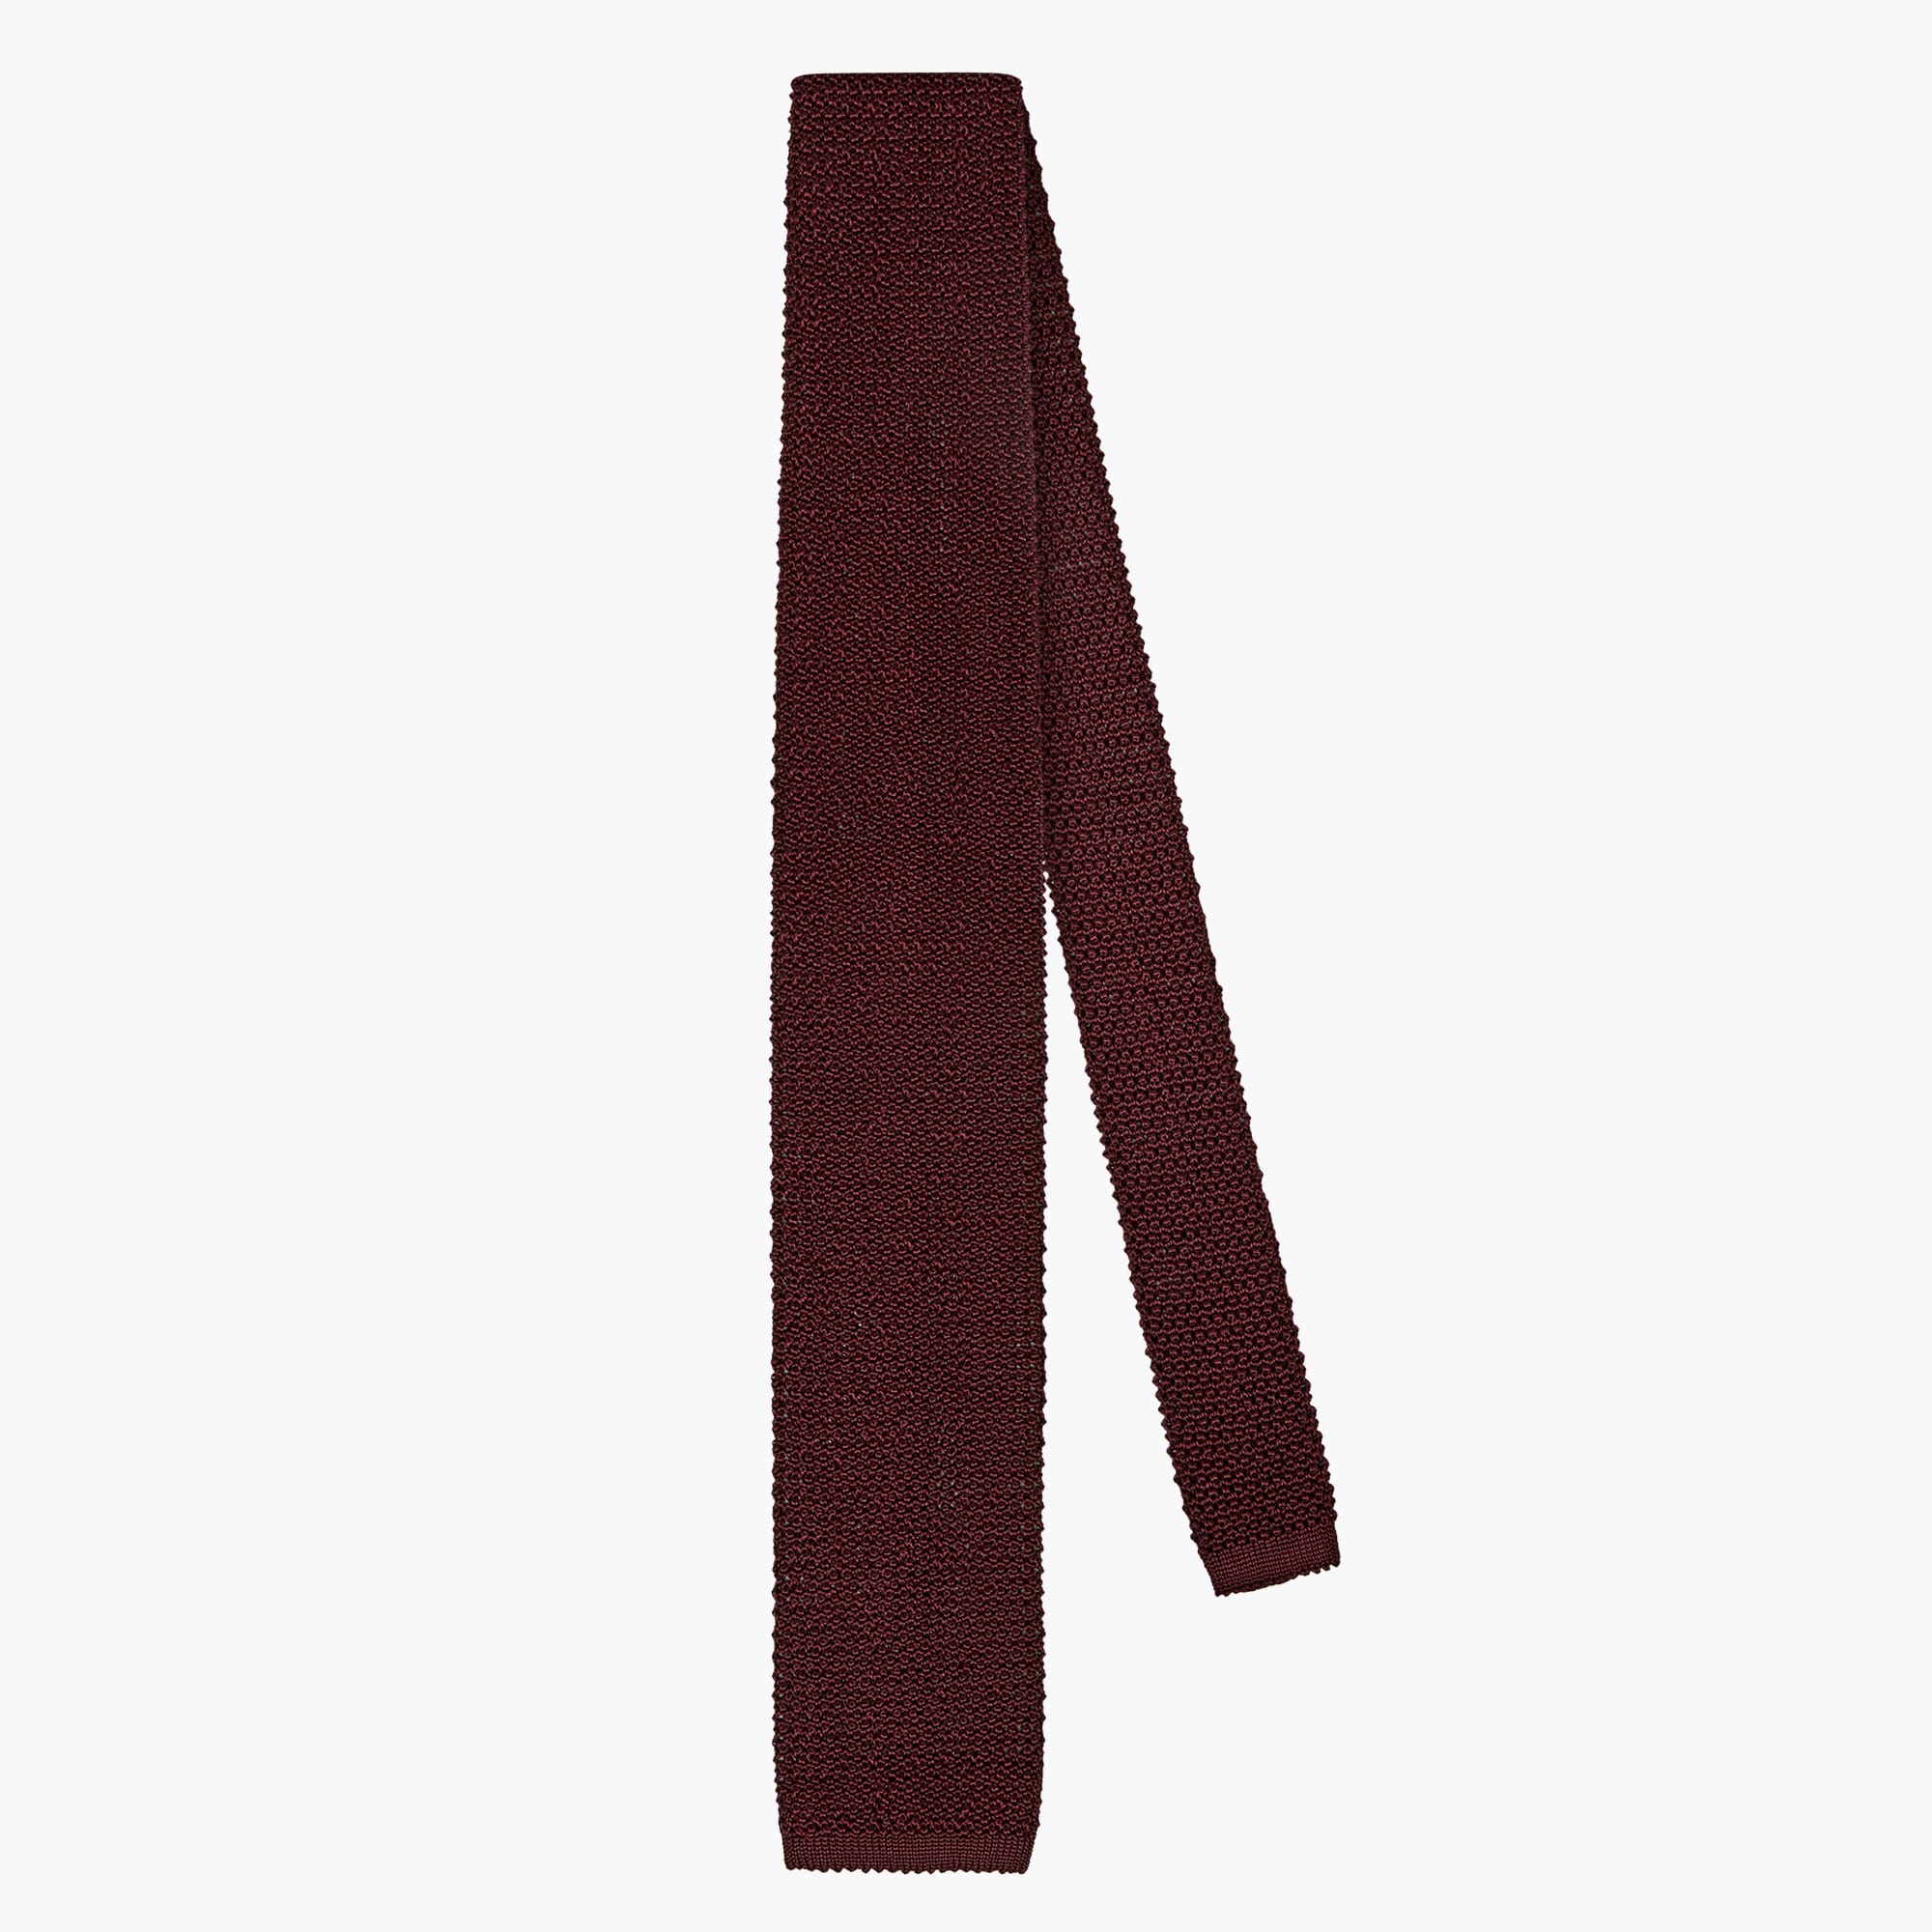 Knitted Solid Rice Grain Tie - Bordeaux